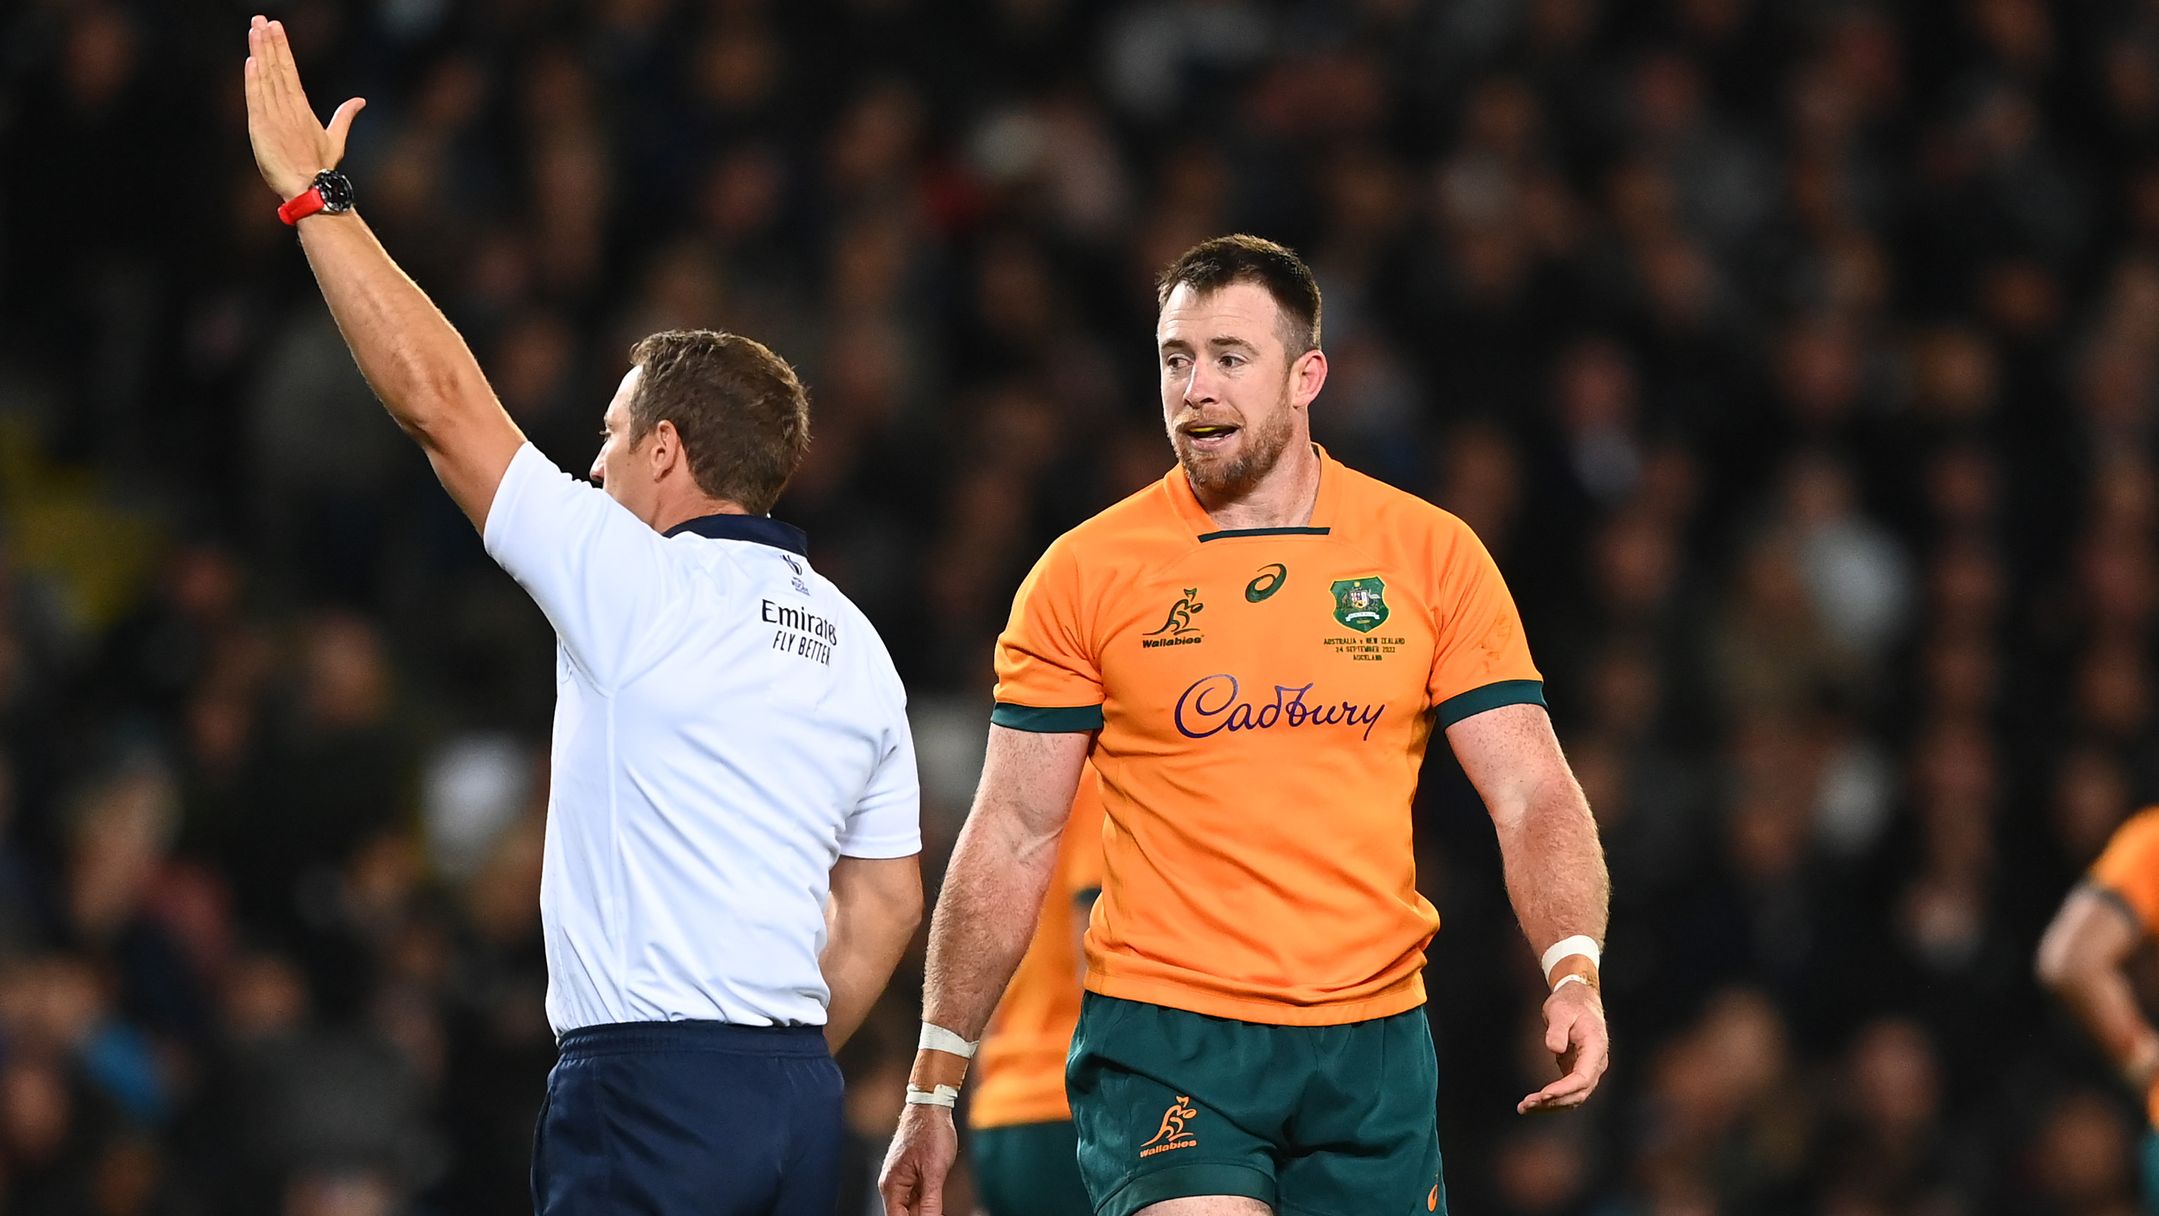 Jed Holloway of the Wallabies receives a yellow card from referee Andrew Brace.